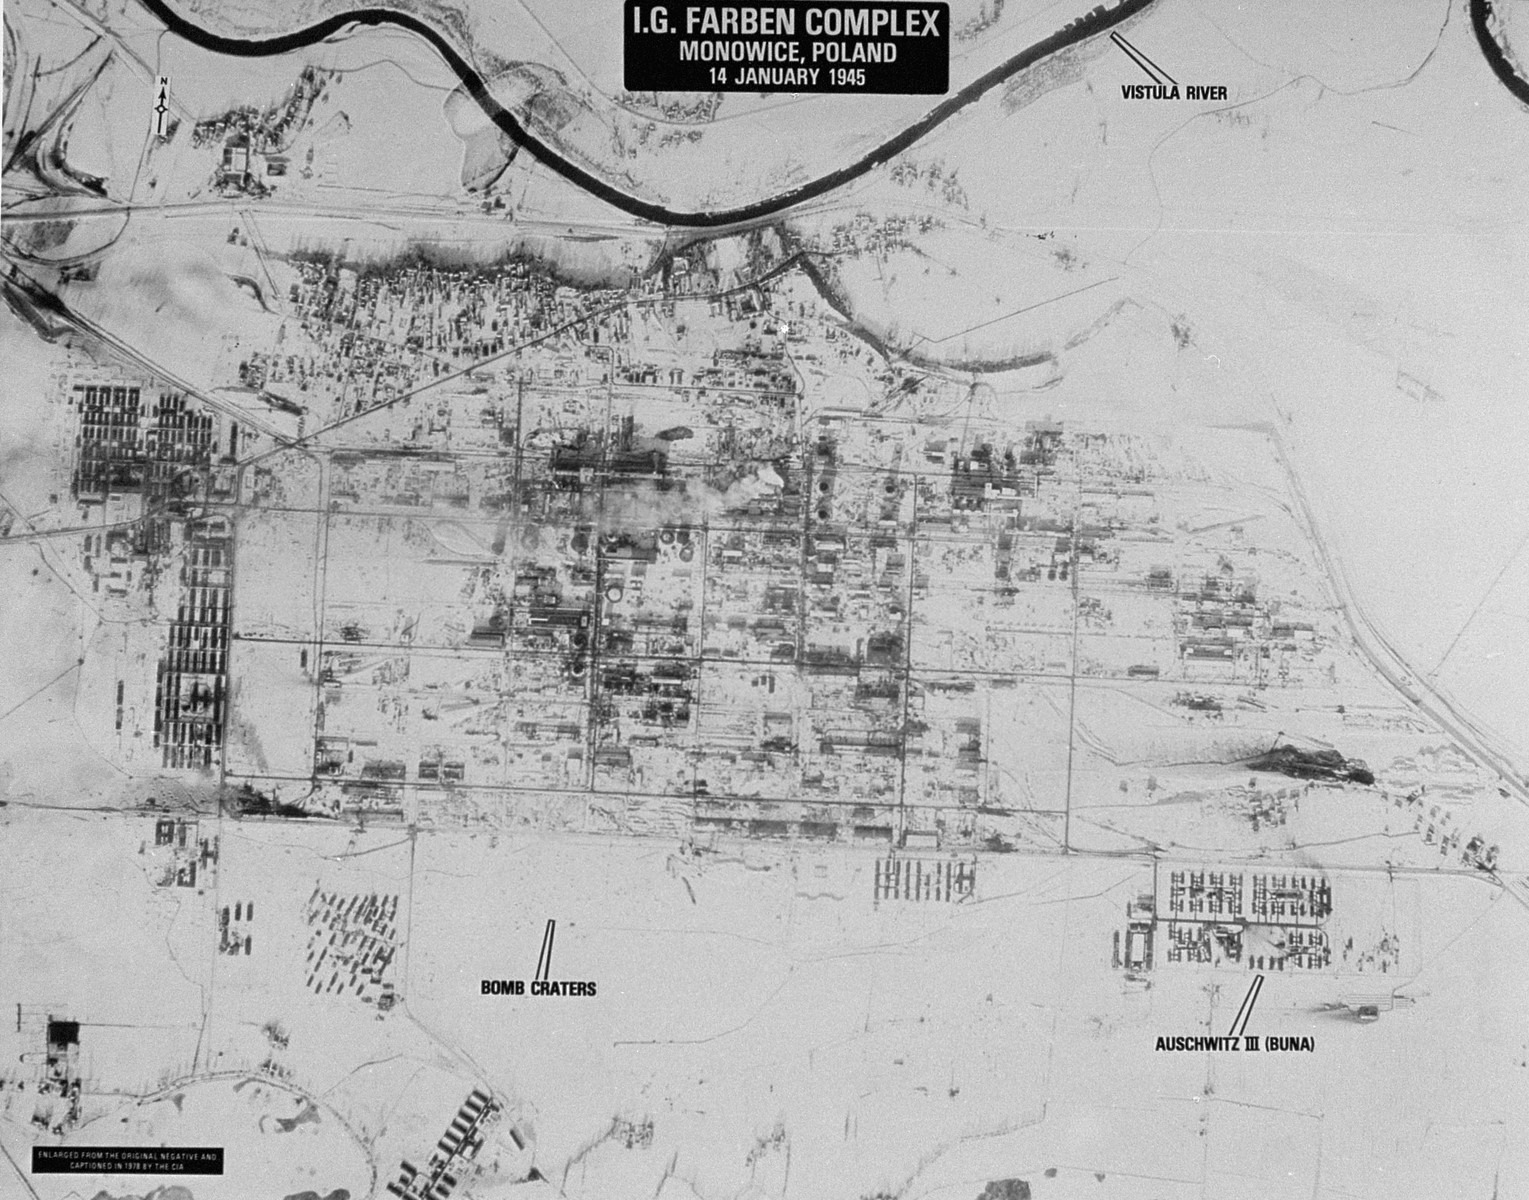 An aerial reconnaissance photograph of the Auschwitz concentration camp showing the I.G. Farben complex.